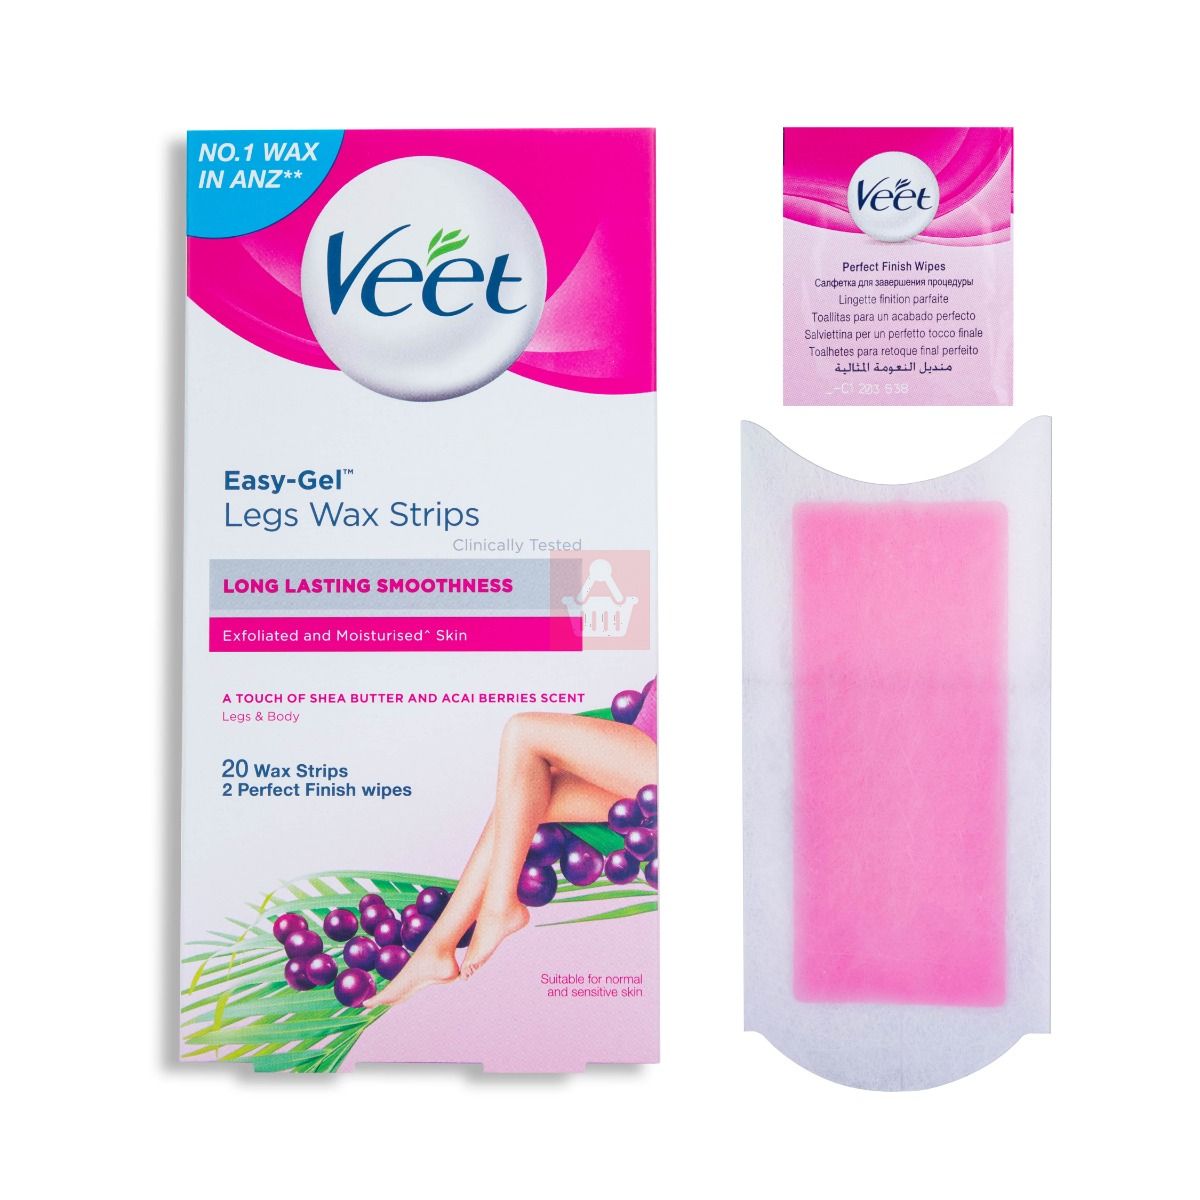 Veet Full Body Waxing Strips Kit For Sensitive Skin (20 Strips) Cold Gel Wax  Hair Removal For Women Upto 28 Days Of Smoothness No Wax Heater Or |  